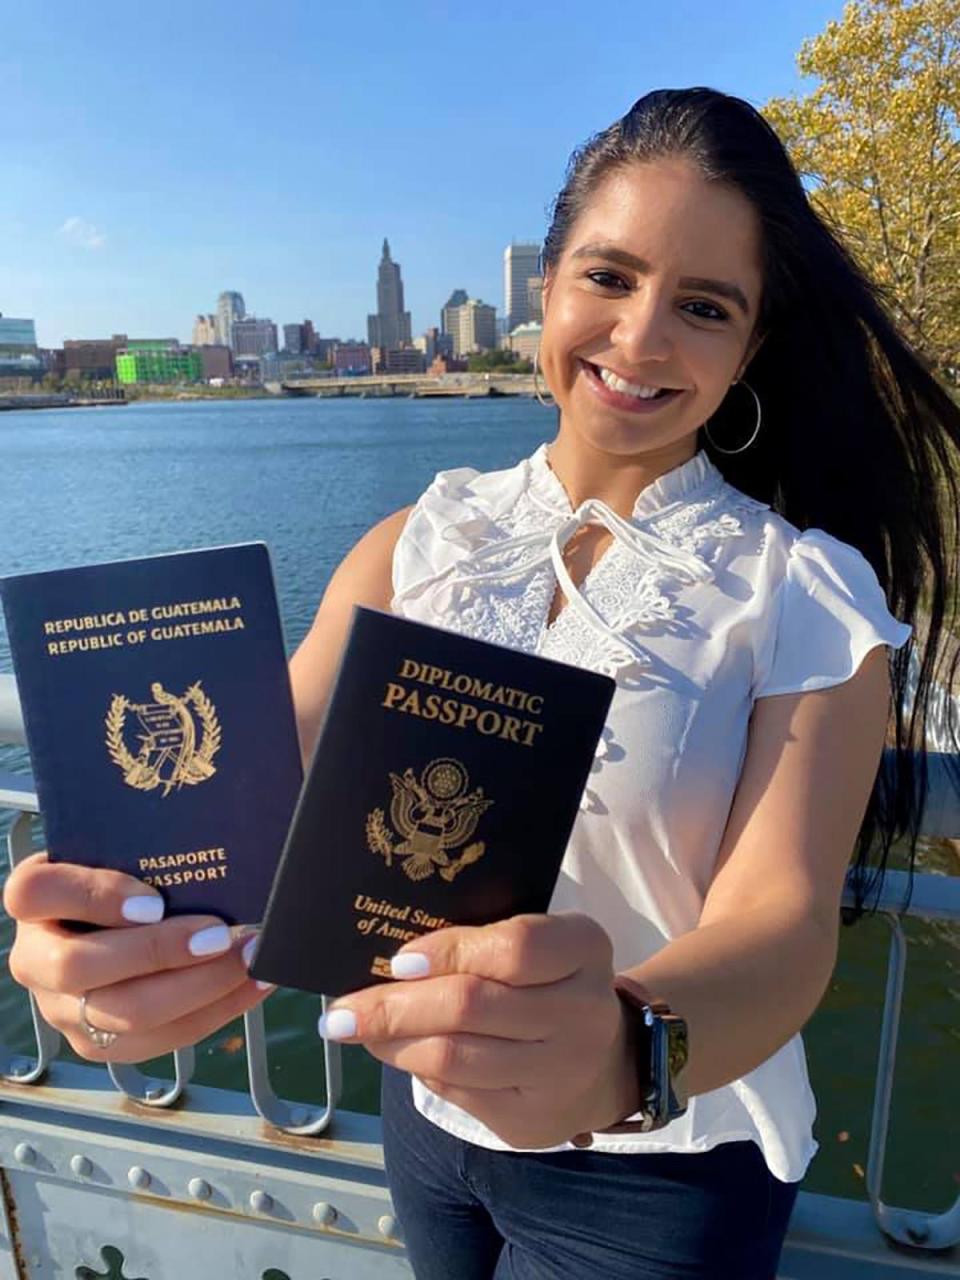 Marta Aparicio, who overcame poverty in Guatemala and Providence to become a U.S. diplomat, shows her old passport, where her journey began, and her new State Department-issued diplomatic passport.